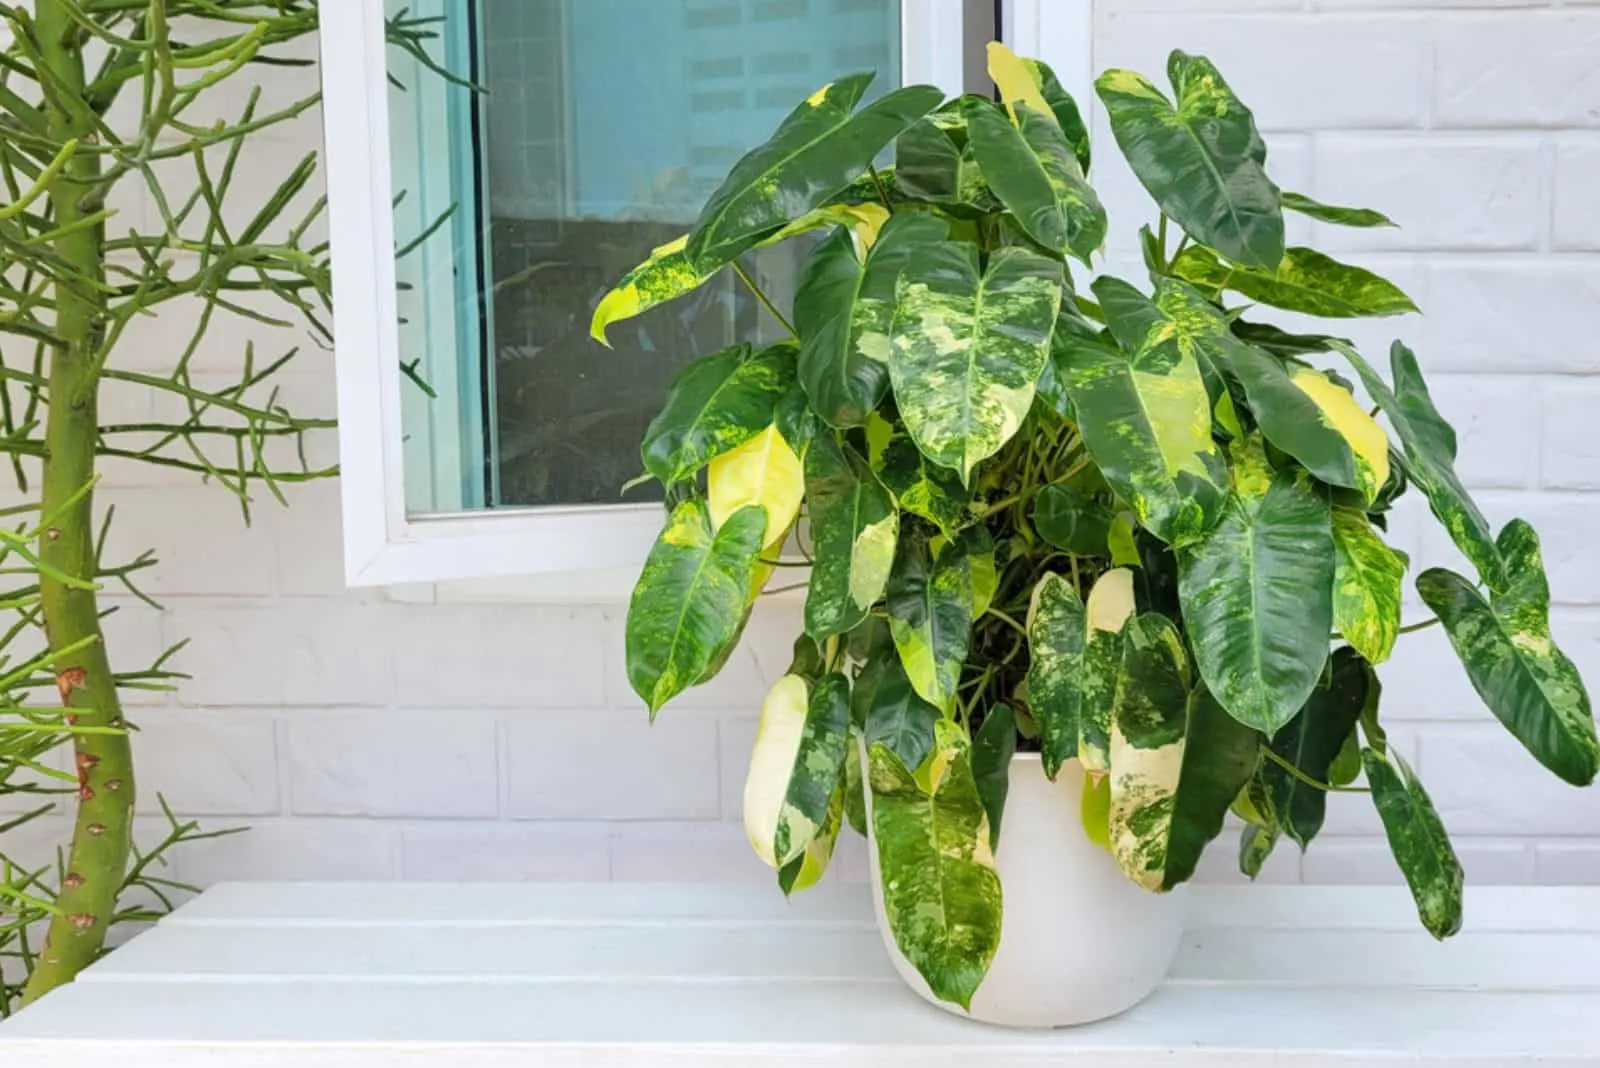 Philodendron burle marx variegated mixed colors Houseplant